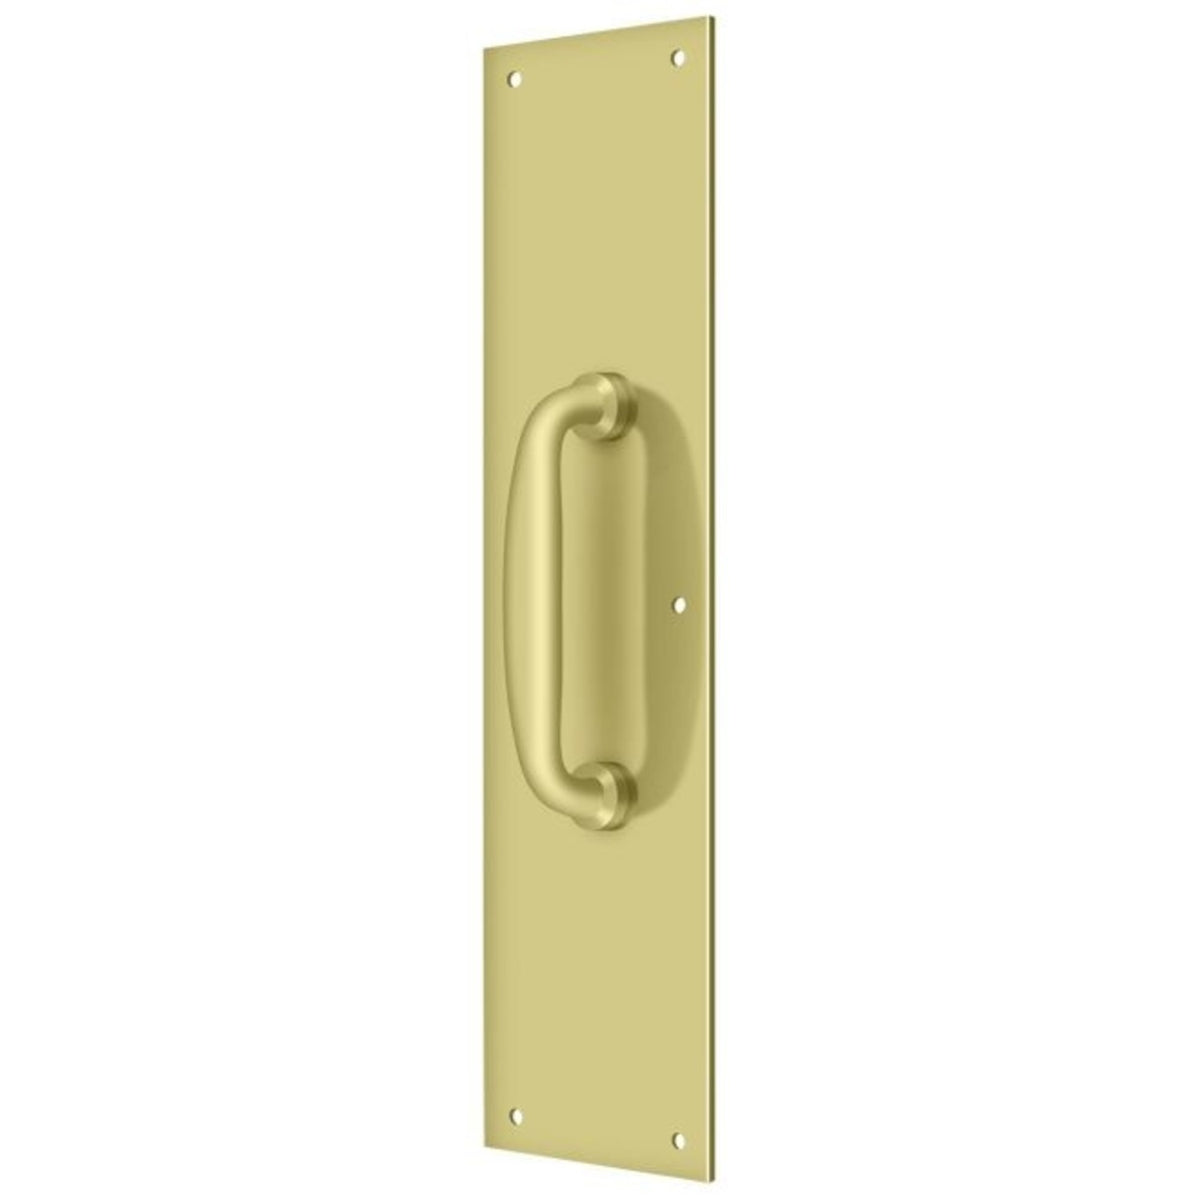 Deltana PPH55U3 Push Plate With Handle, Bright Brass